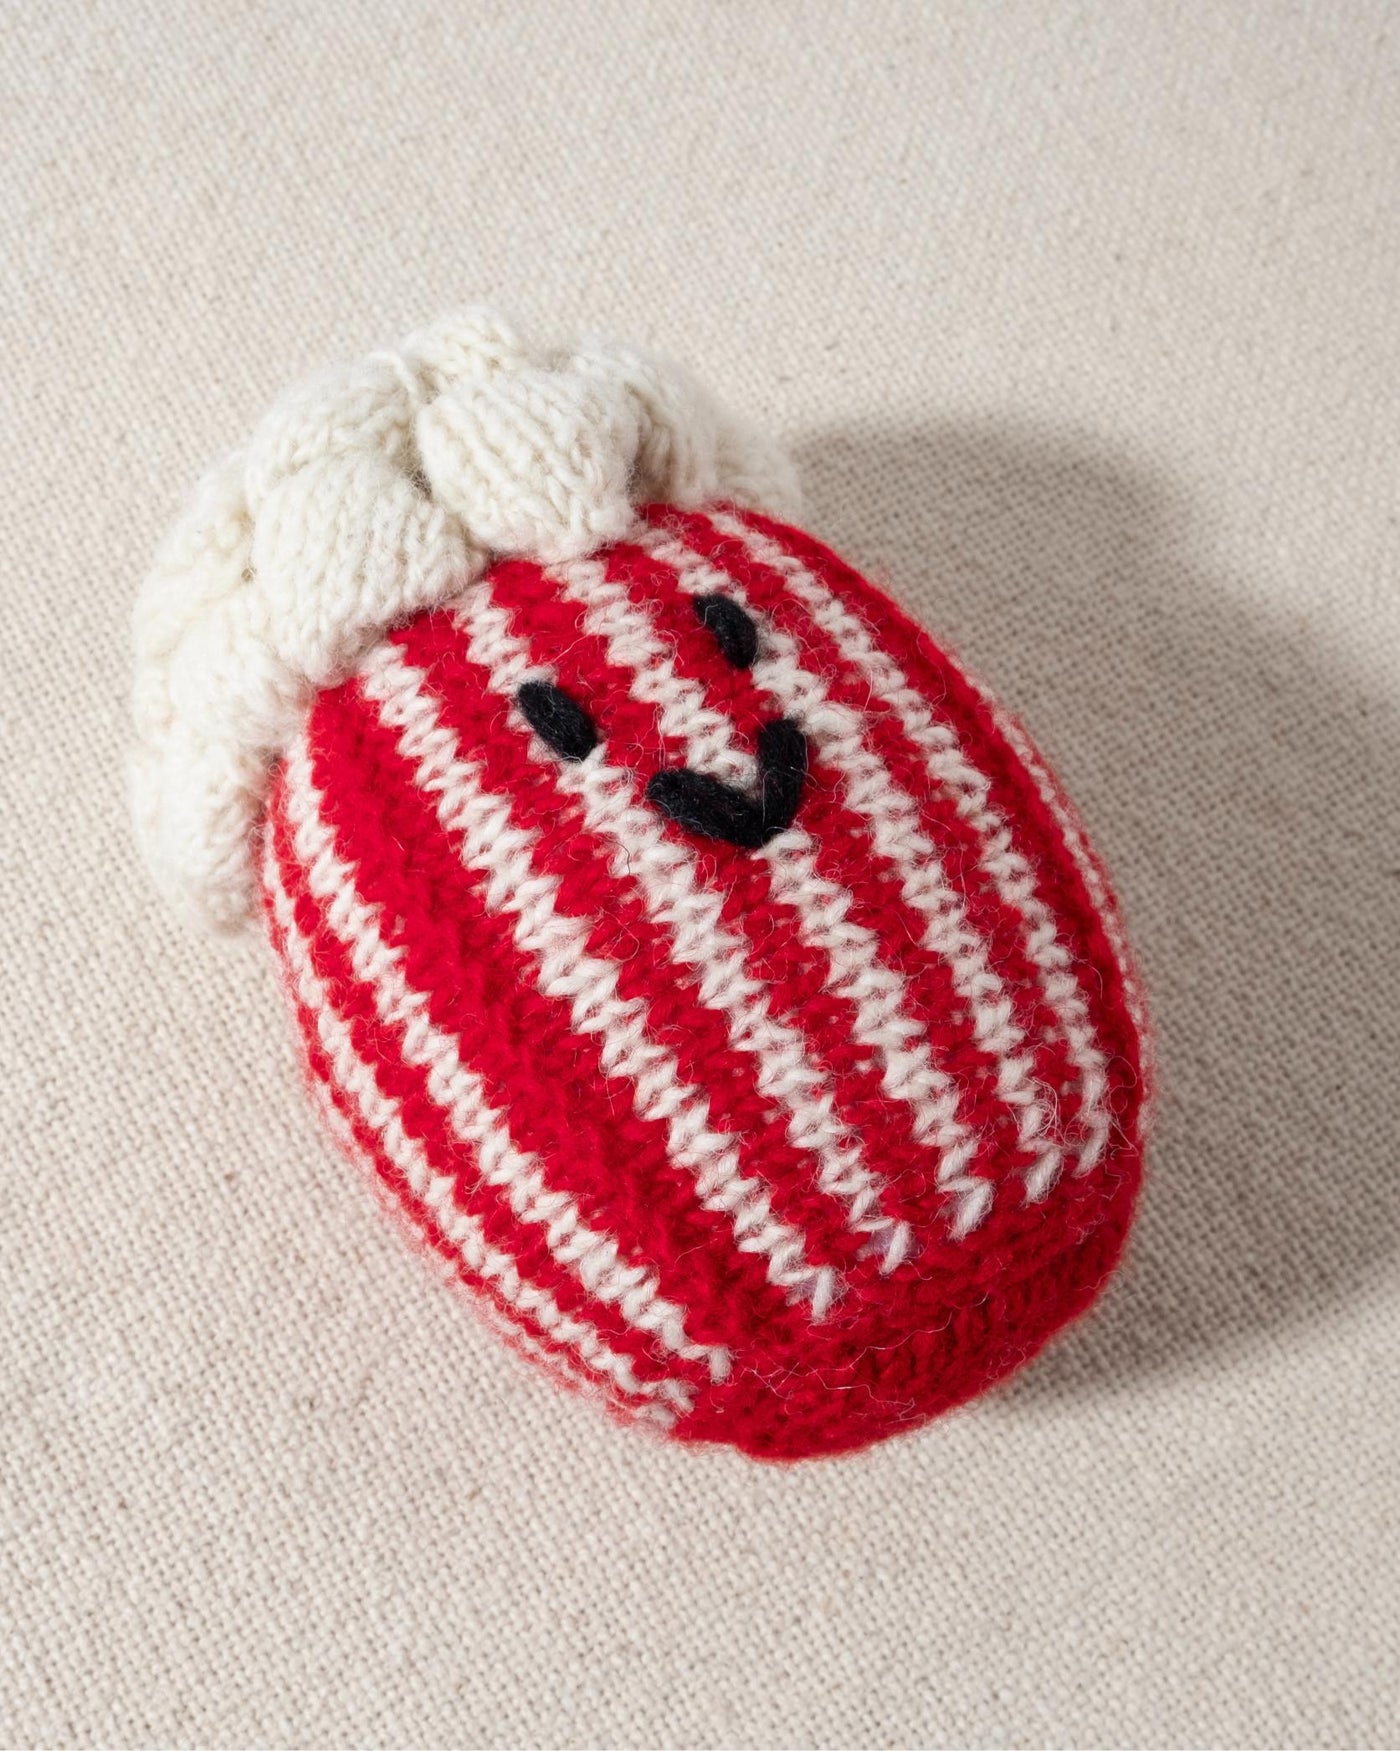 red and white hand knit crochet popcorn dog toy